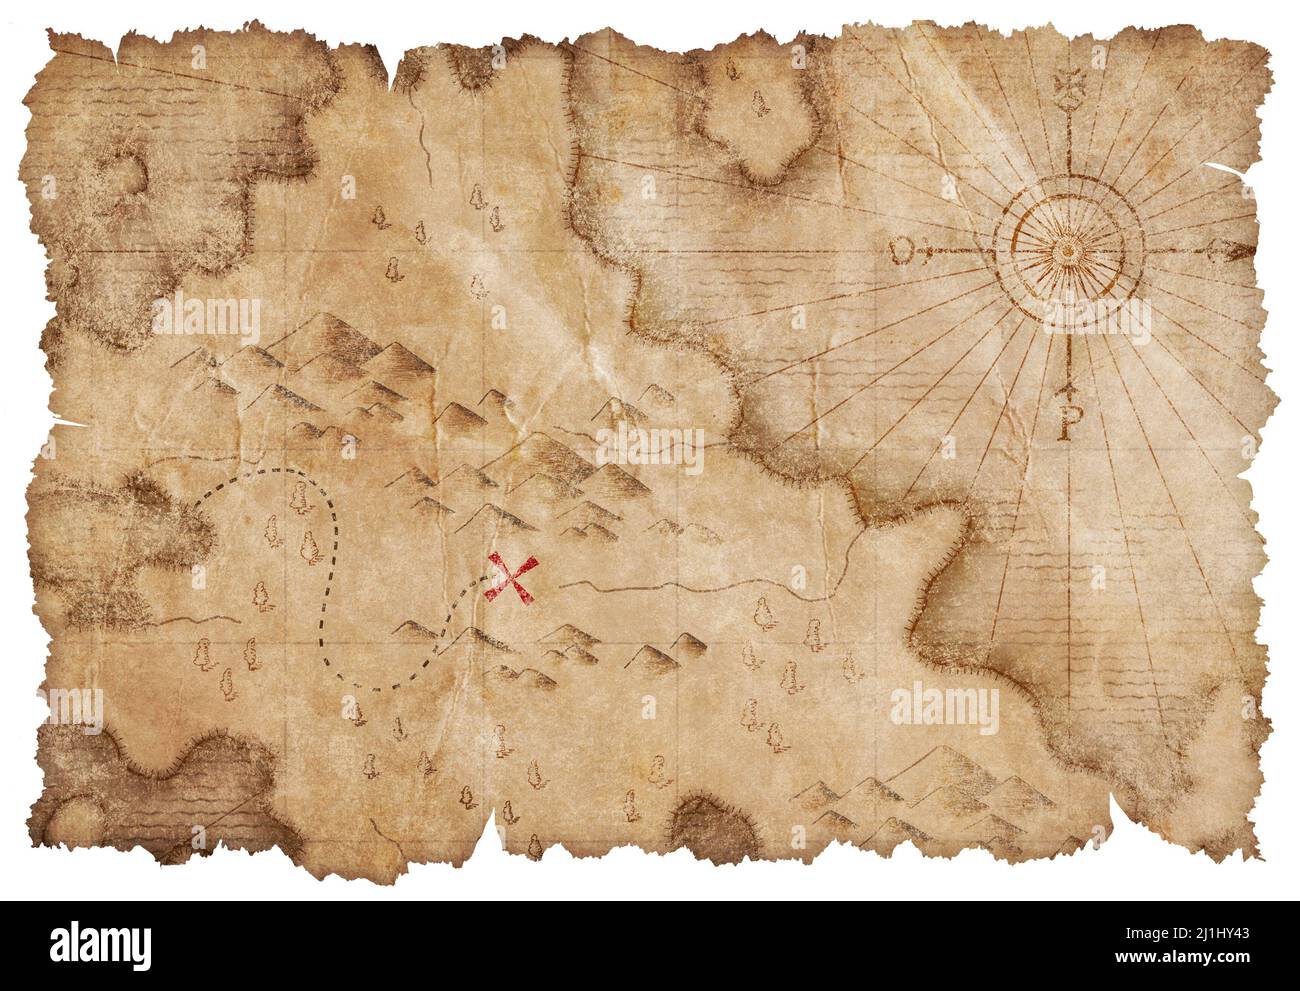 medieval pirates map with hidden treasures mark isolated Stock Photo